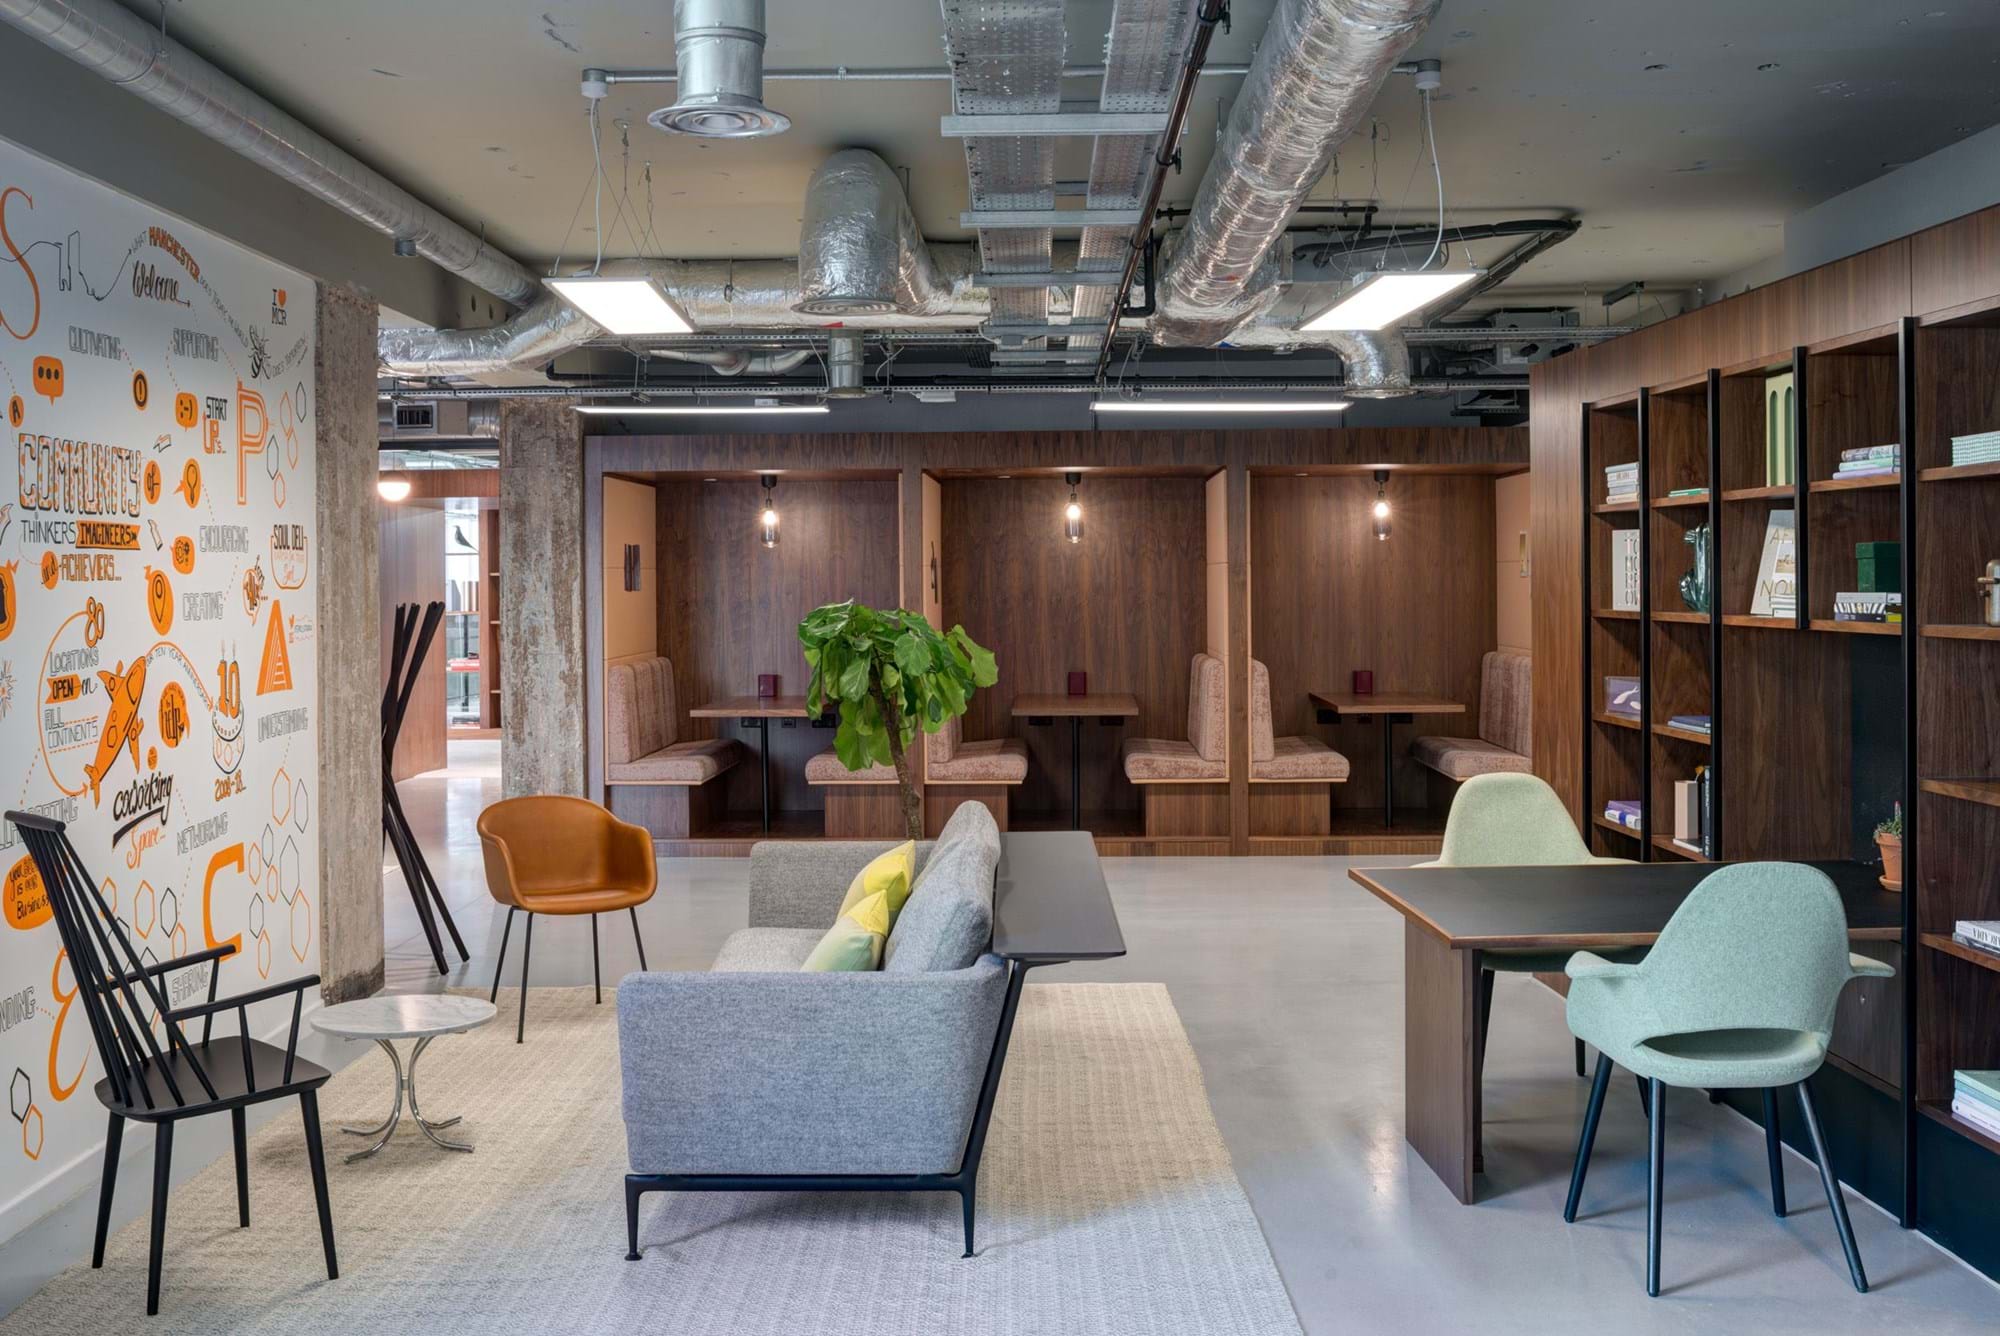 Modus Workspace office design, fit out and refurbishment - Spaces - Peter House, Manchester - Spaces Peter House 35 highres sRGB.jpg